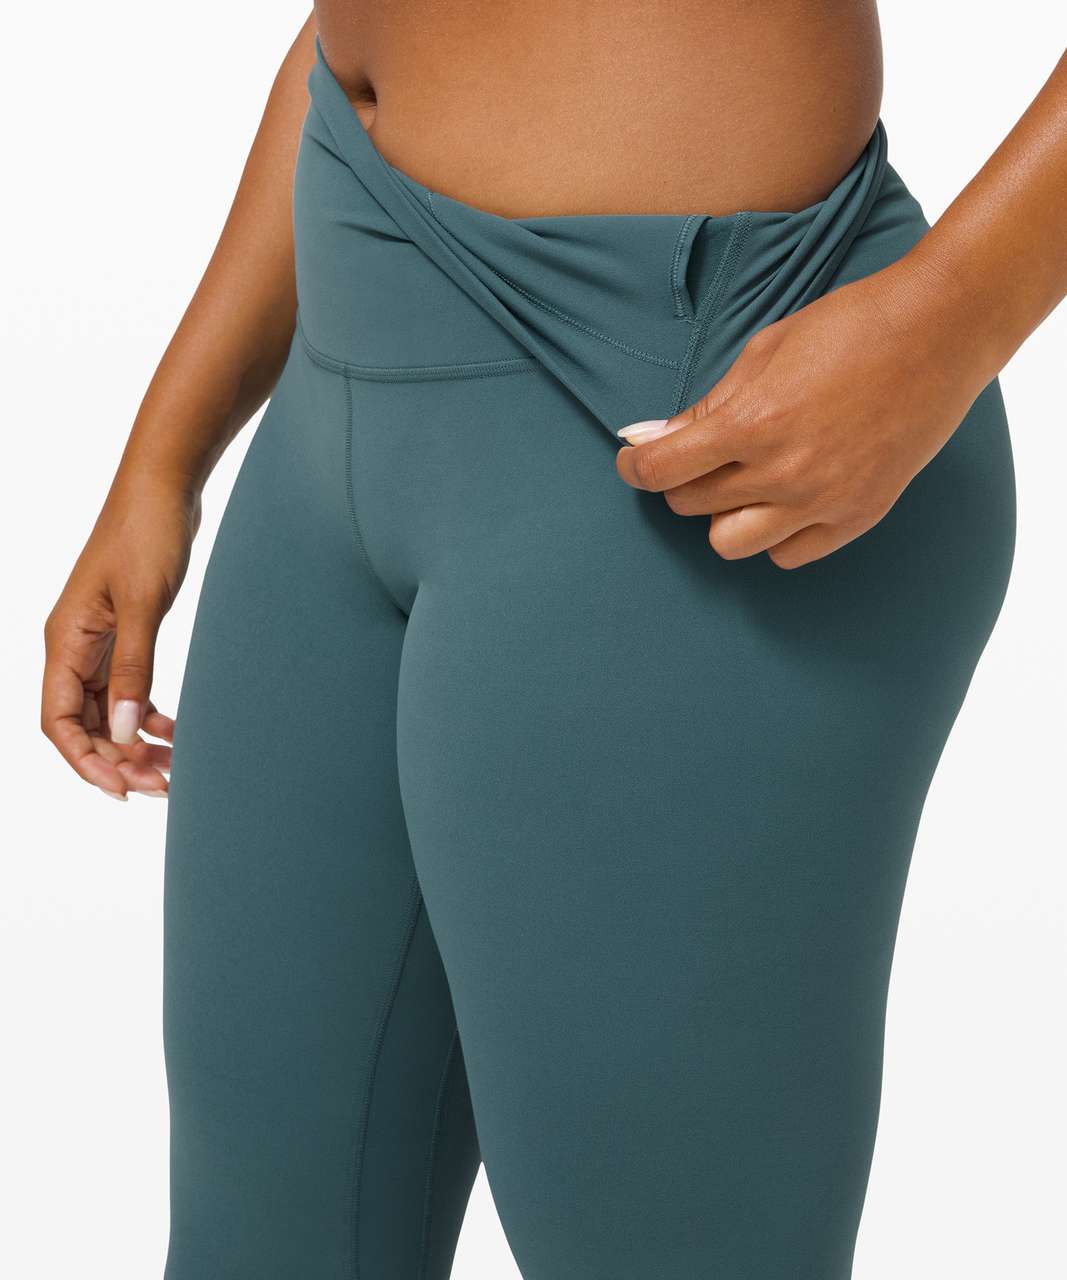 Lululemon Align Jogger Desert Teal NWT Size 4 - $51 (47% Off Retail) New  With Tags - From Tyra